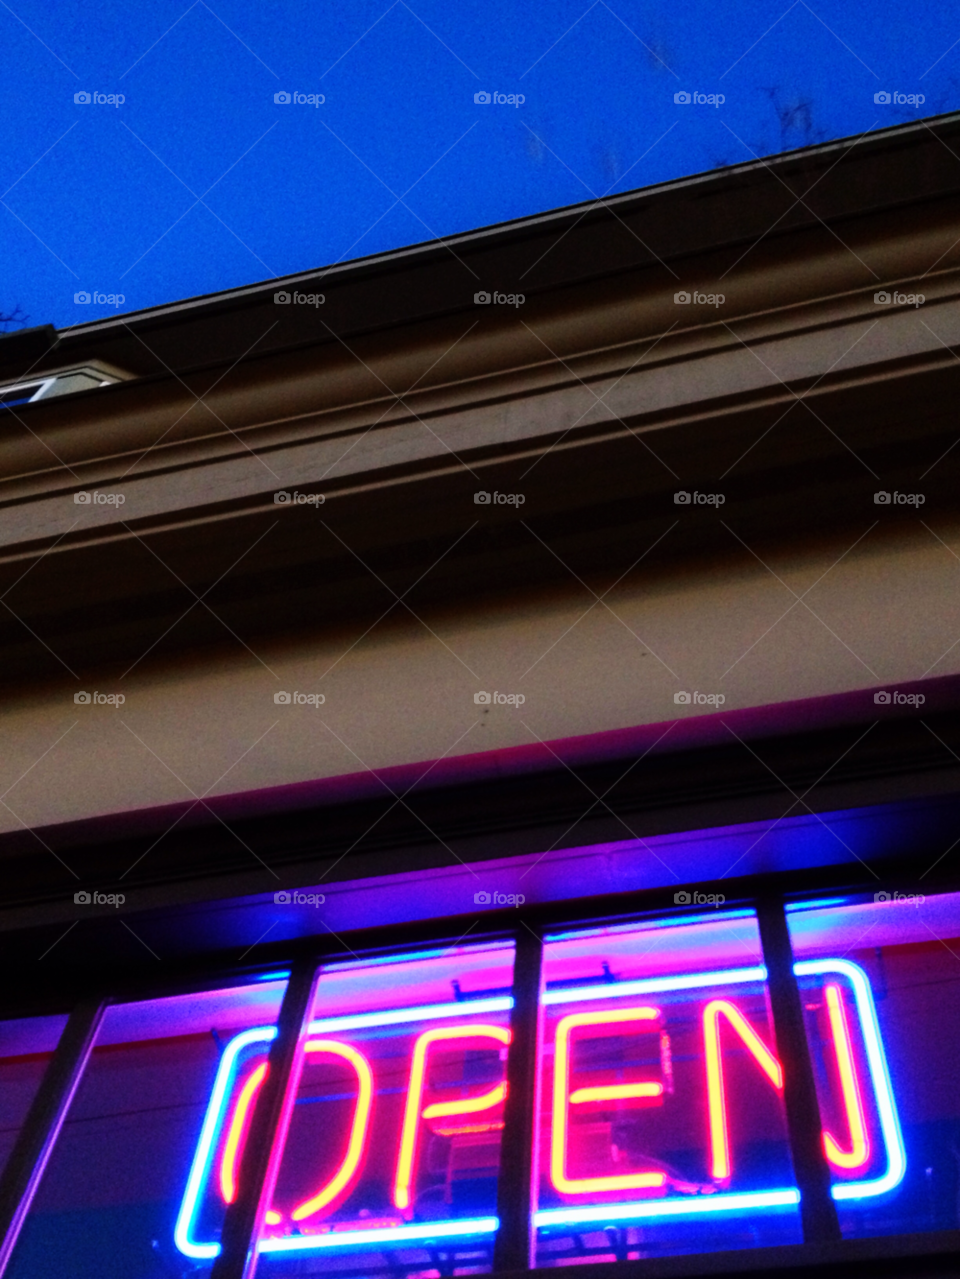 neon blue sky open sign too of building by sellershot